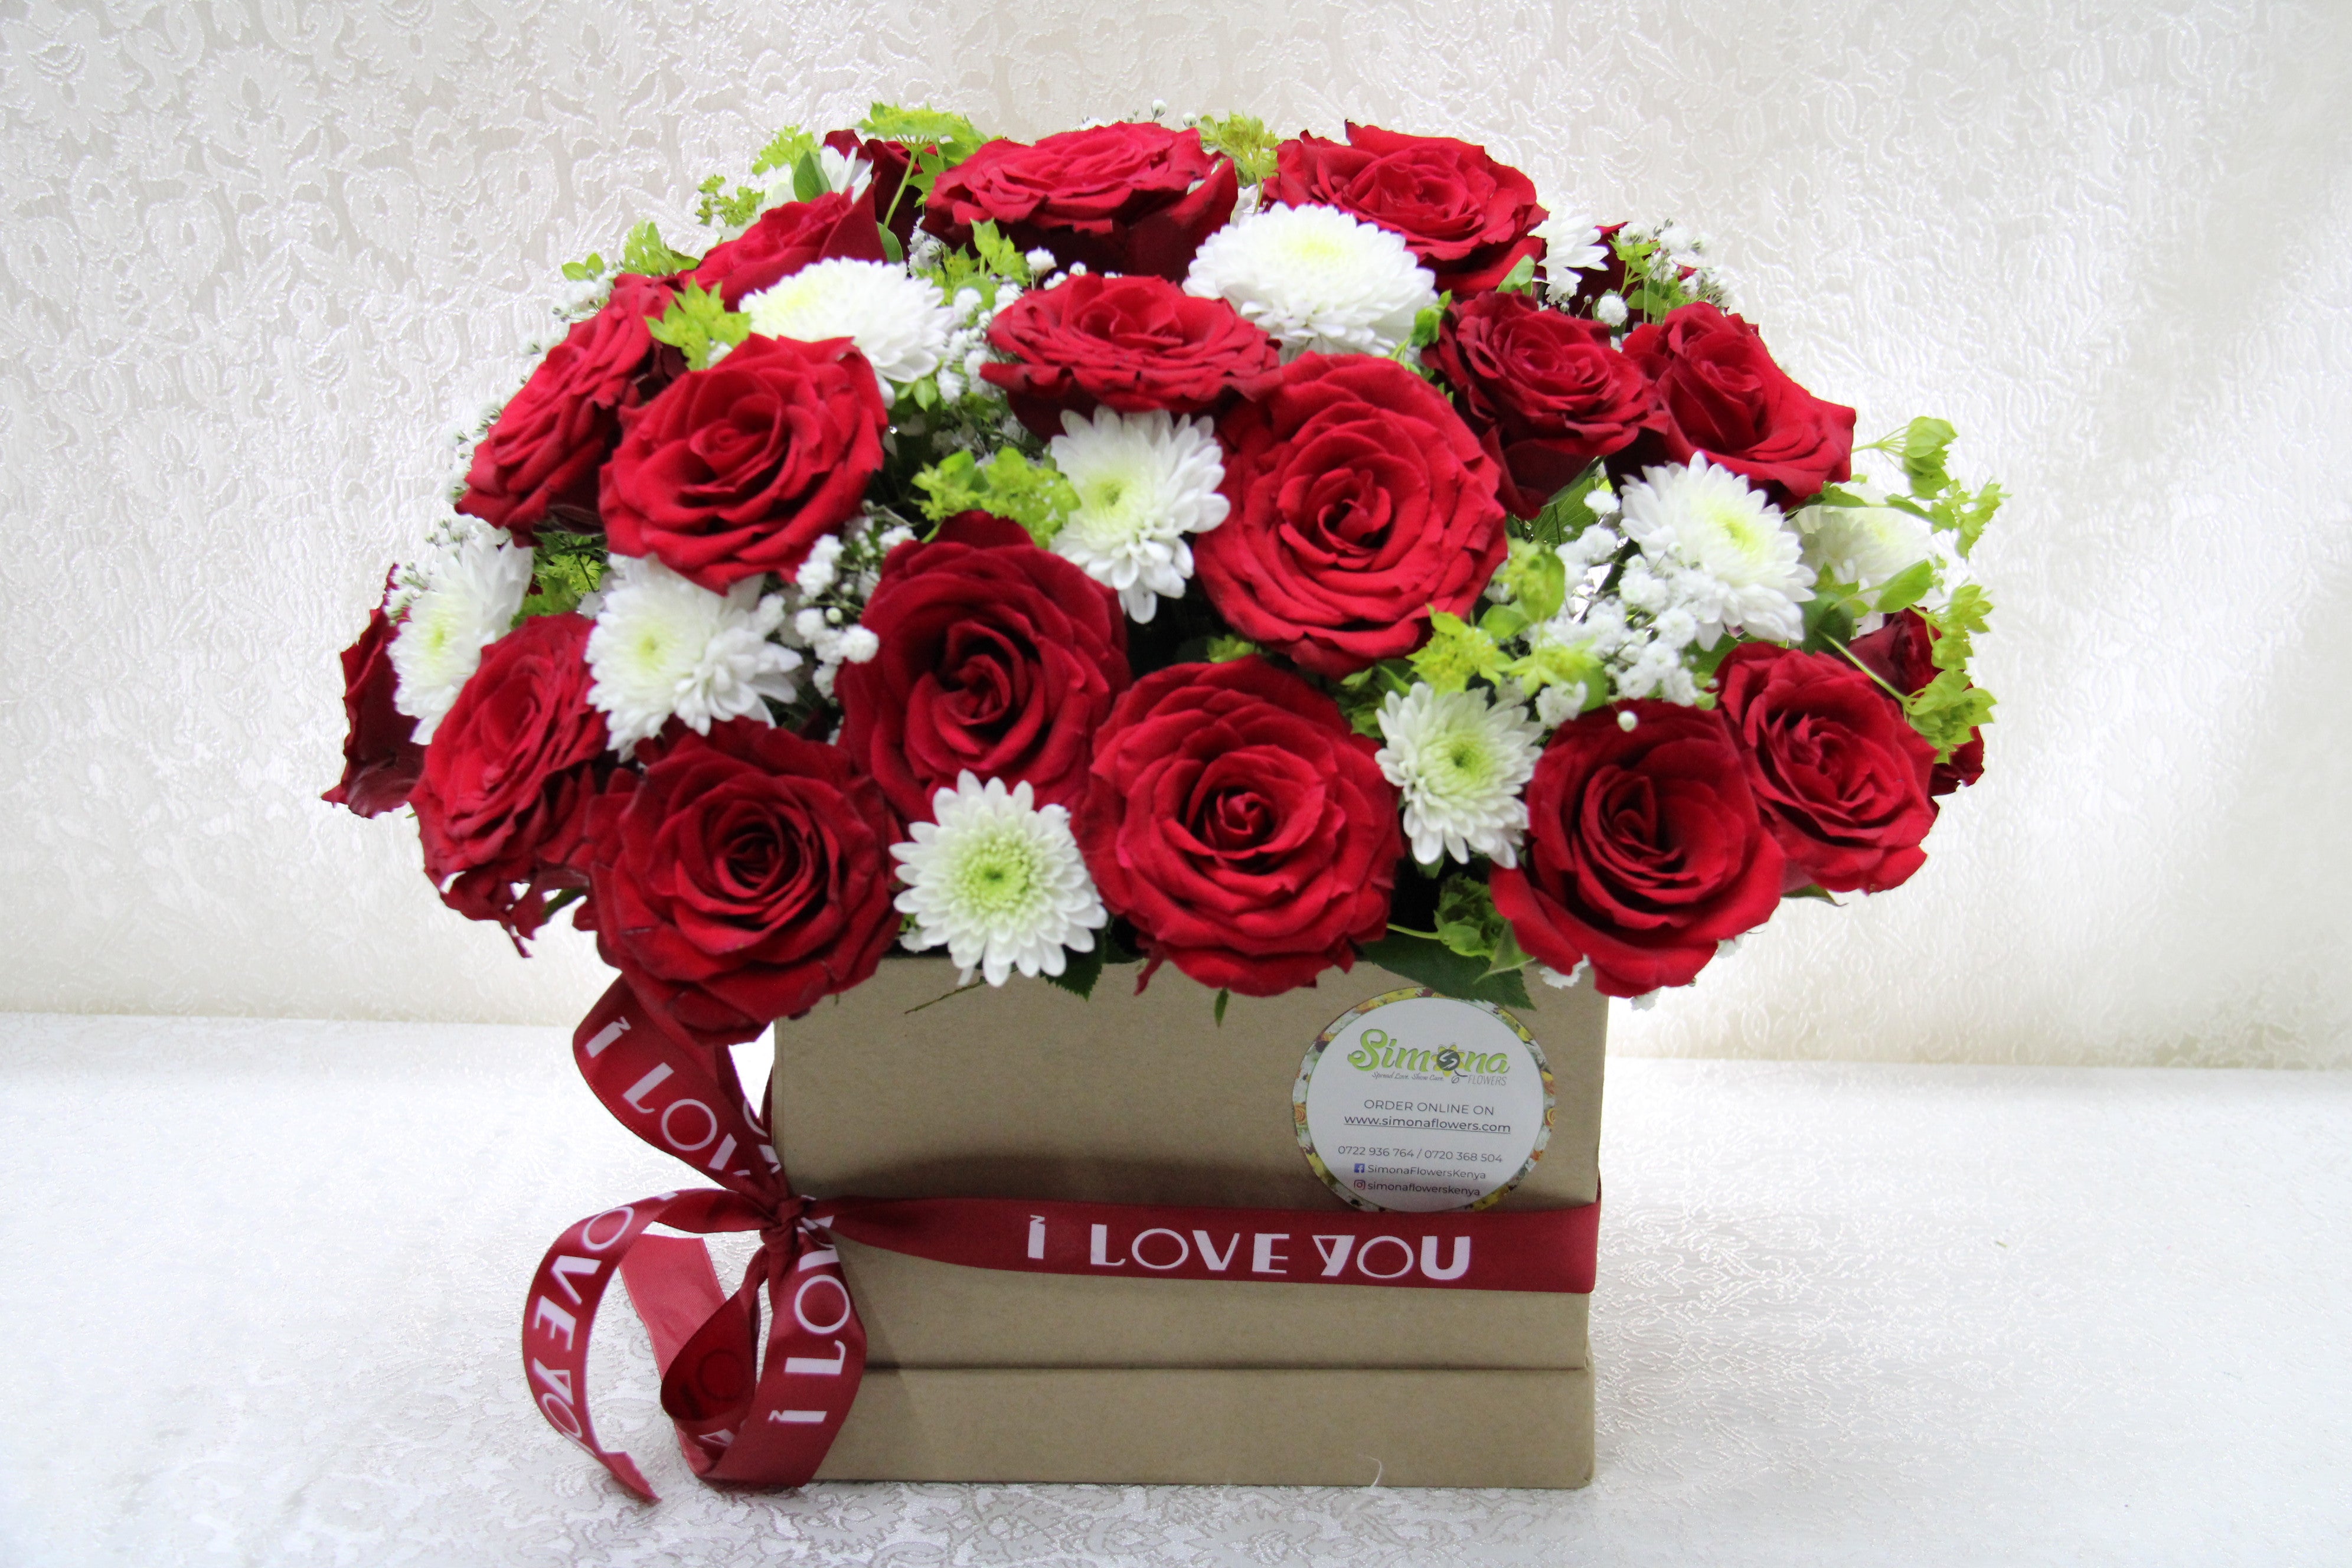 Simona Flowers - An assortment of roses and complimenting flowers arranged in a royal box. The desire box is a nice touch of class to send to that special someone on valentines day.